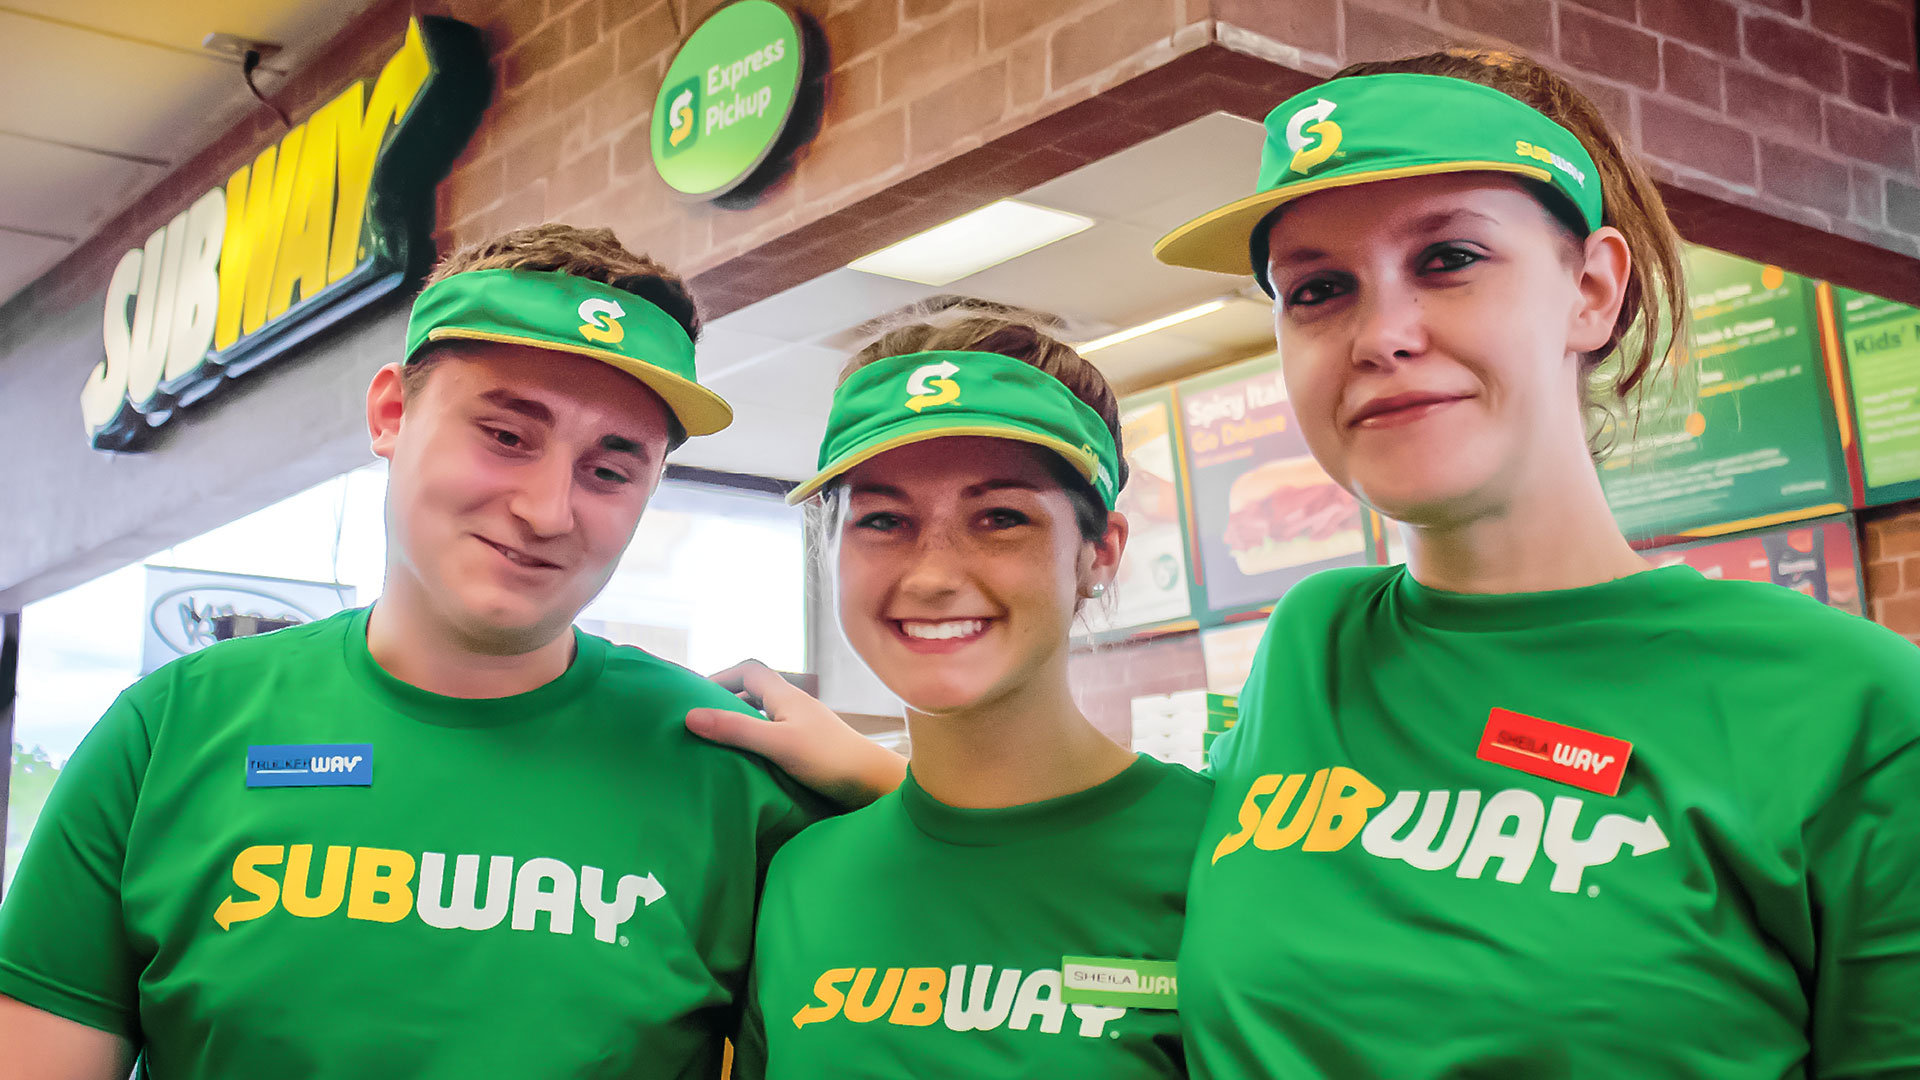 Subway: Join Us and Craft Delightful Sandwiches